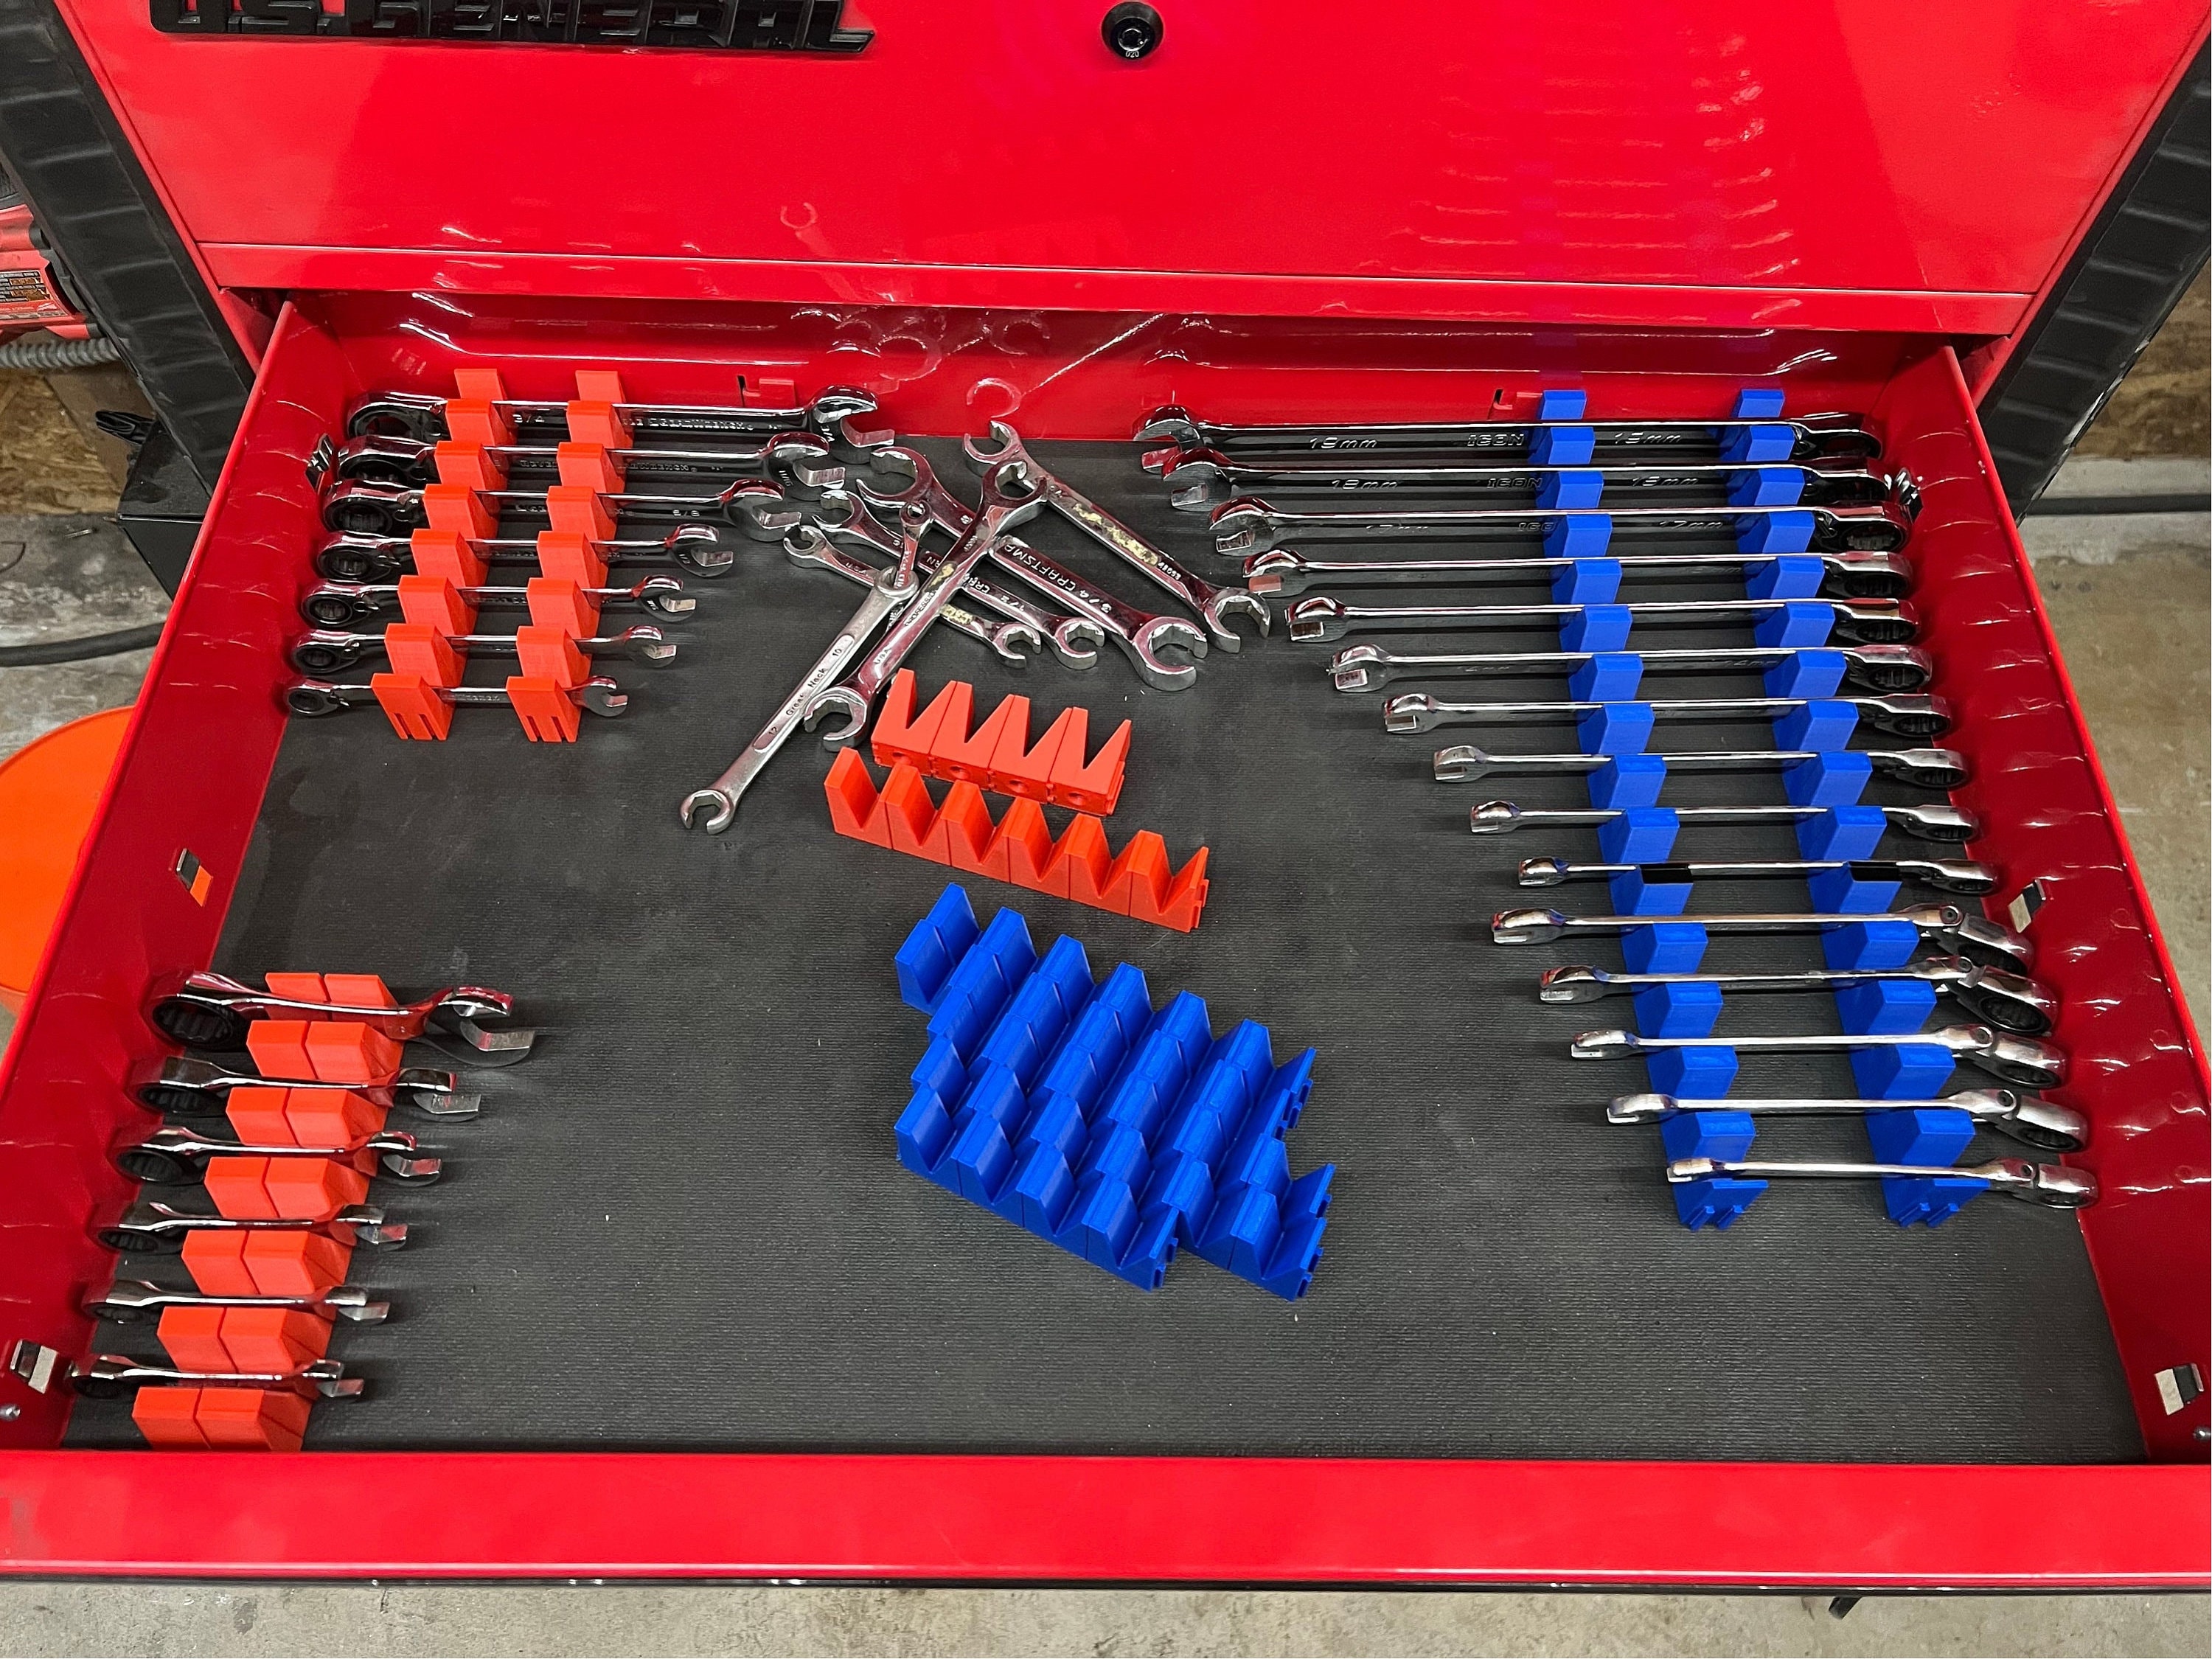 Love this Tool Grid System! 3D printed holder's work great! : r